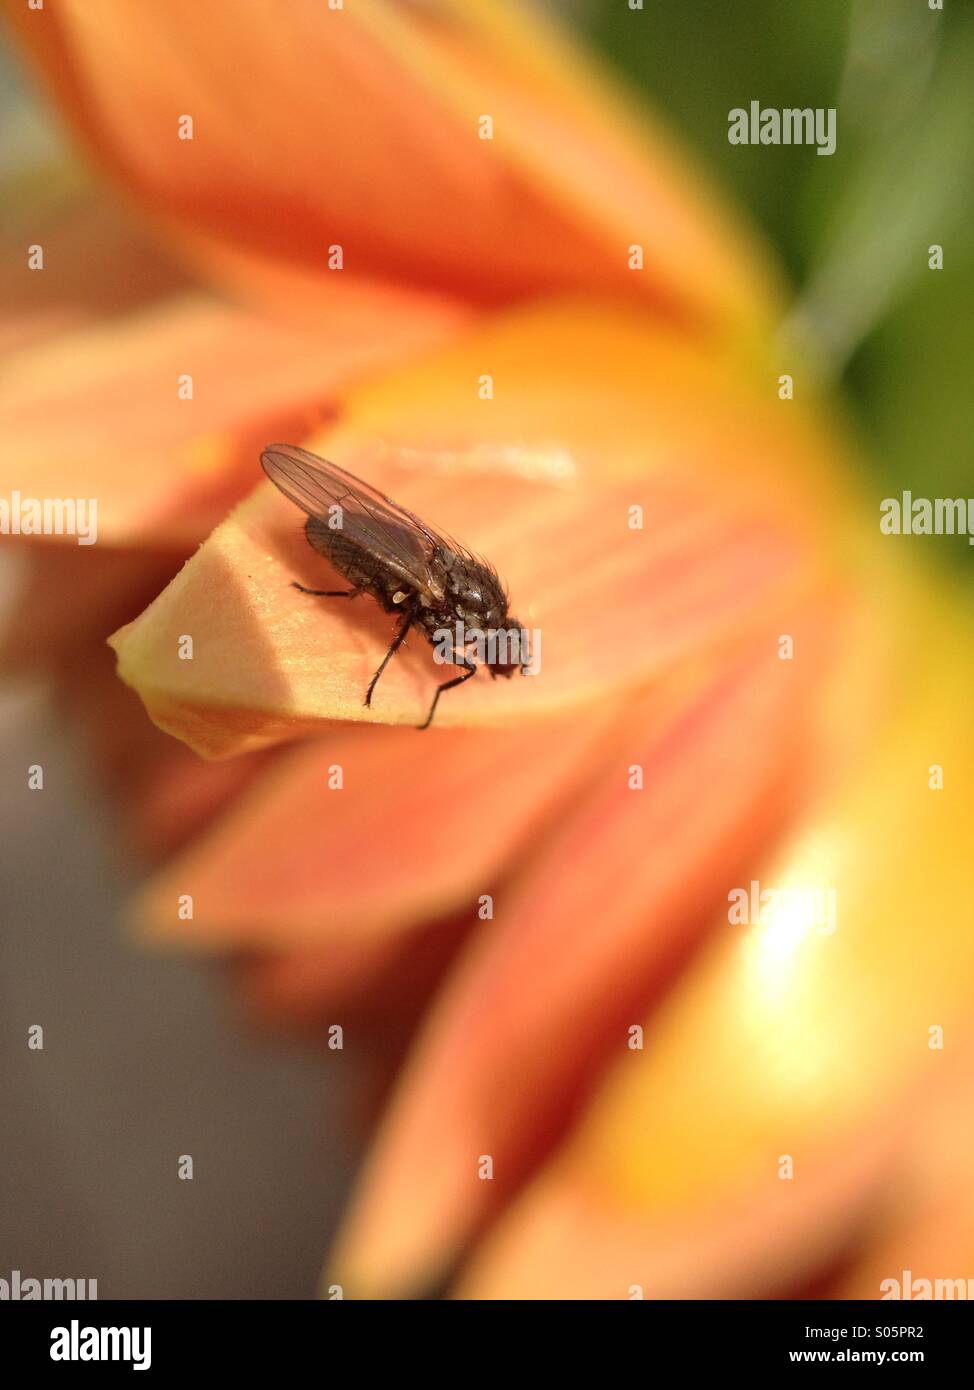 Close up of a fly on petals Stock Photo